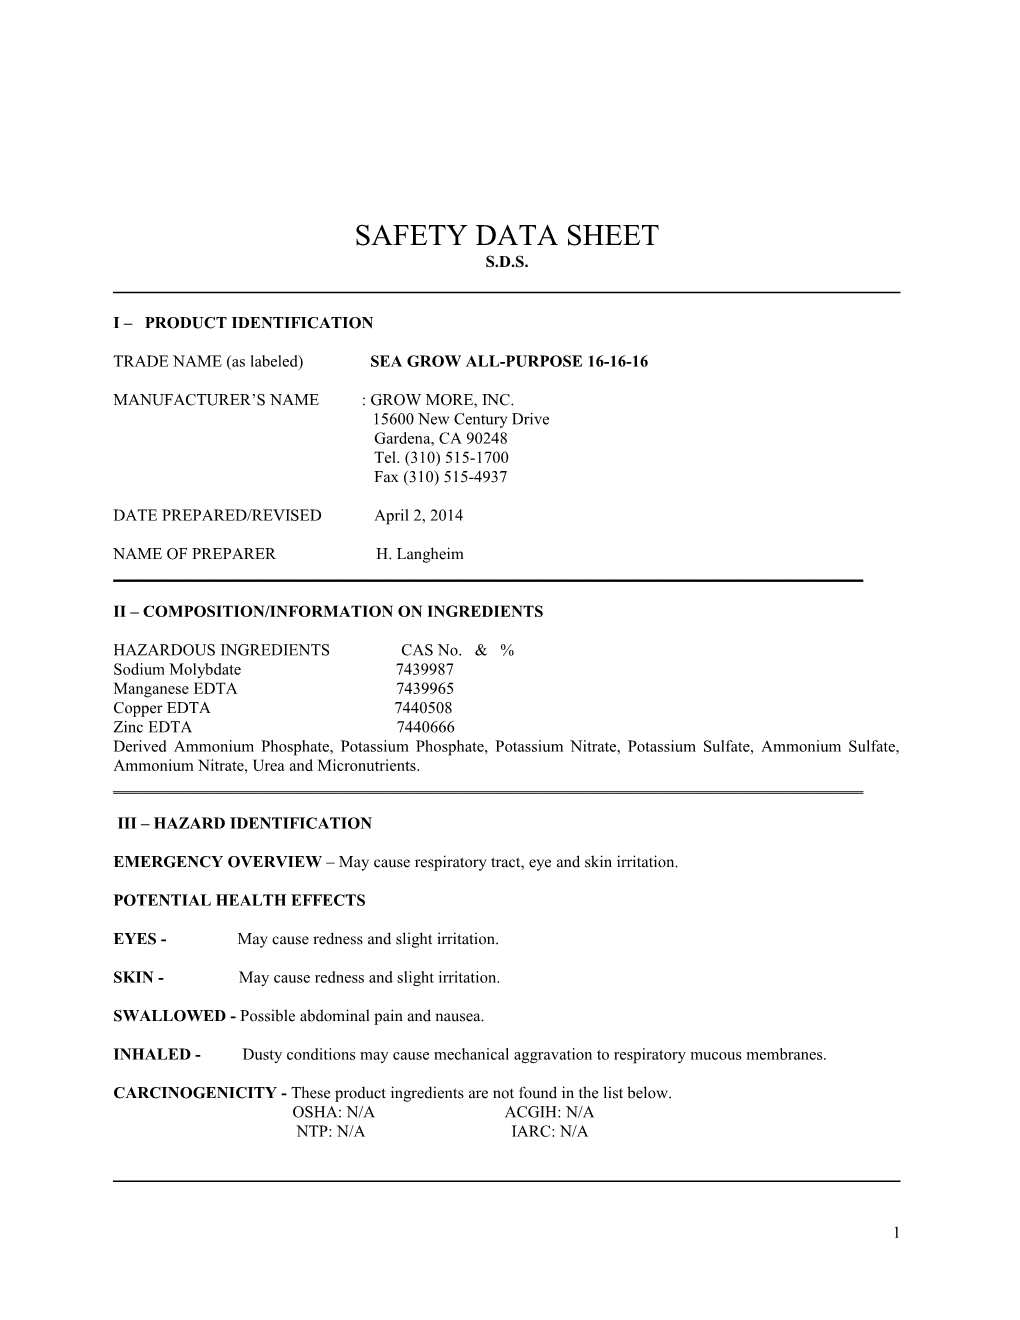 Material Safety Data Sheet s5